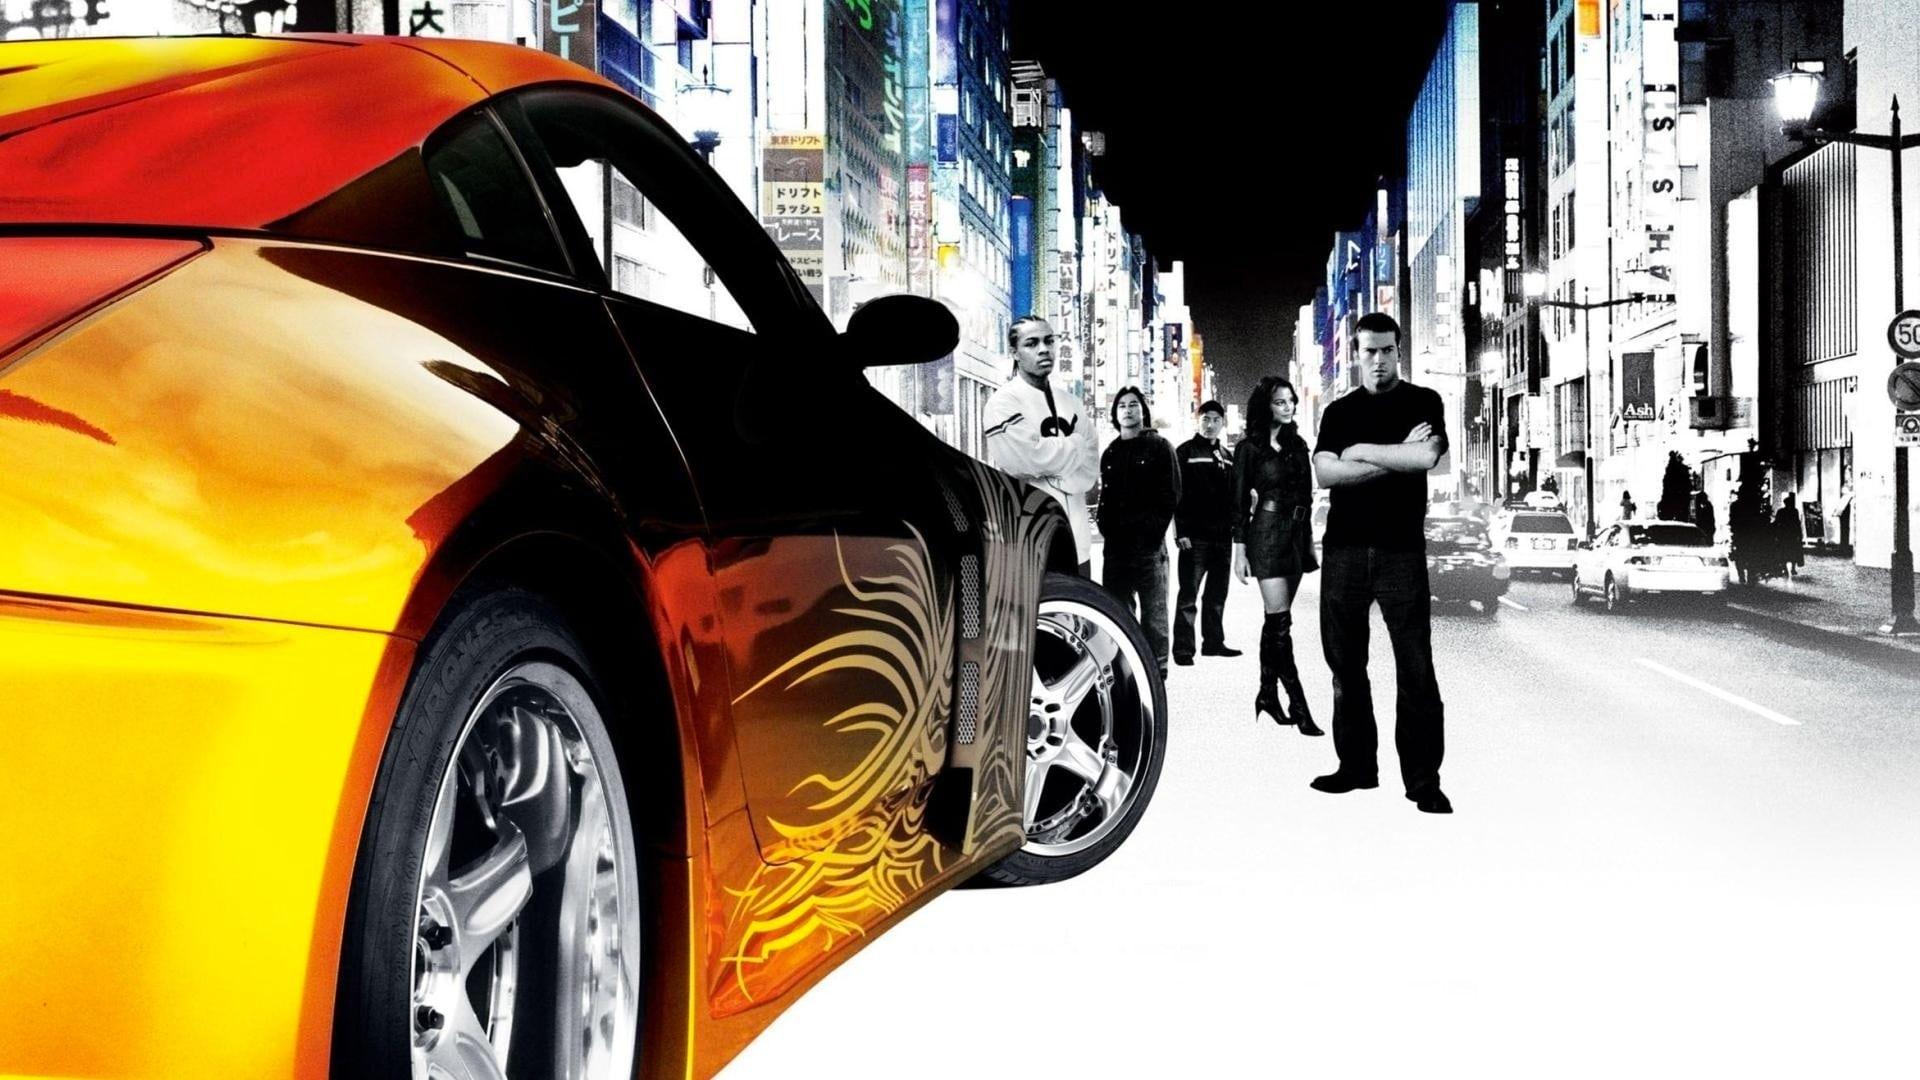 The Fast and the Furious: Tokyo Drift backdrop